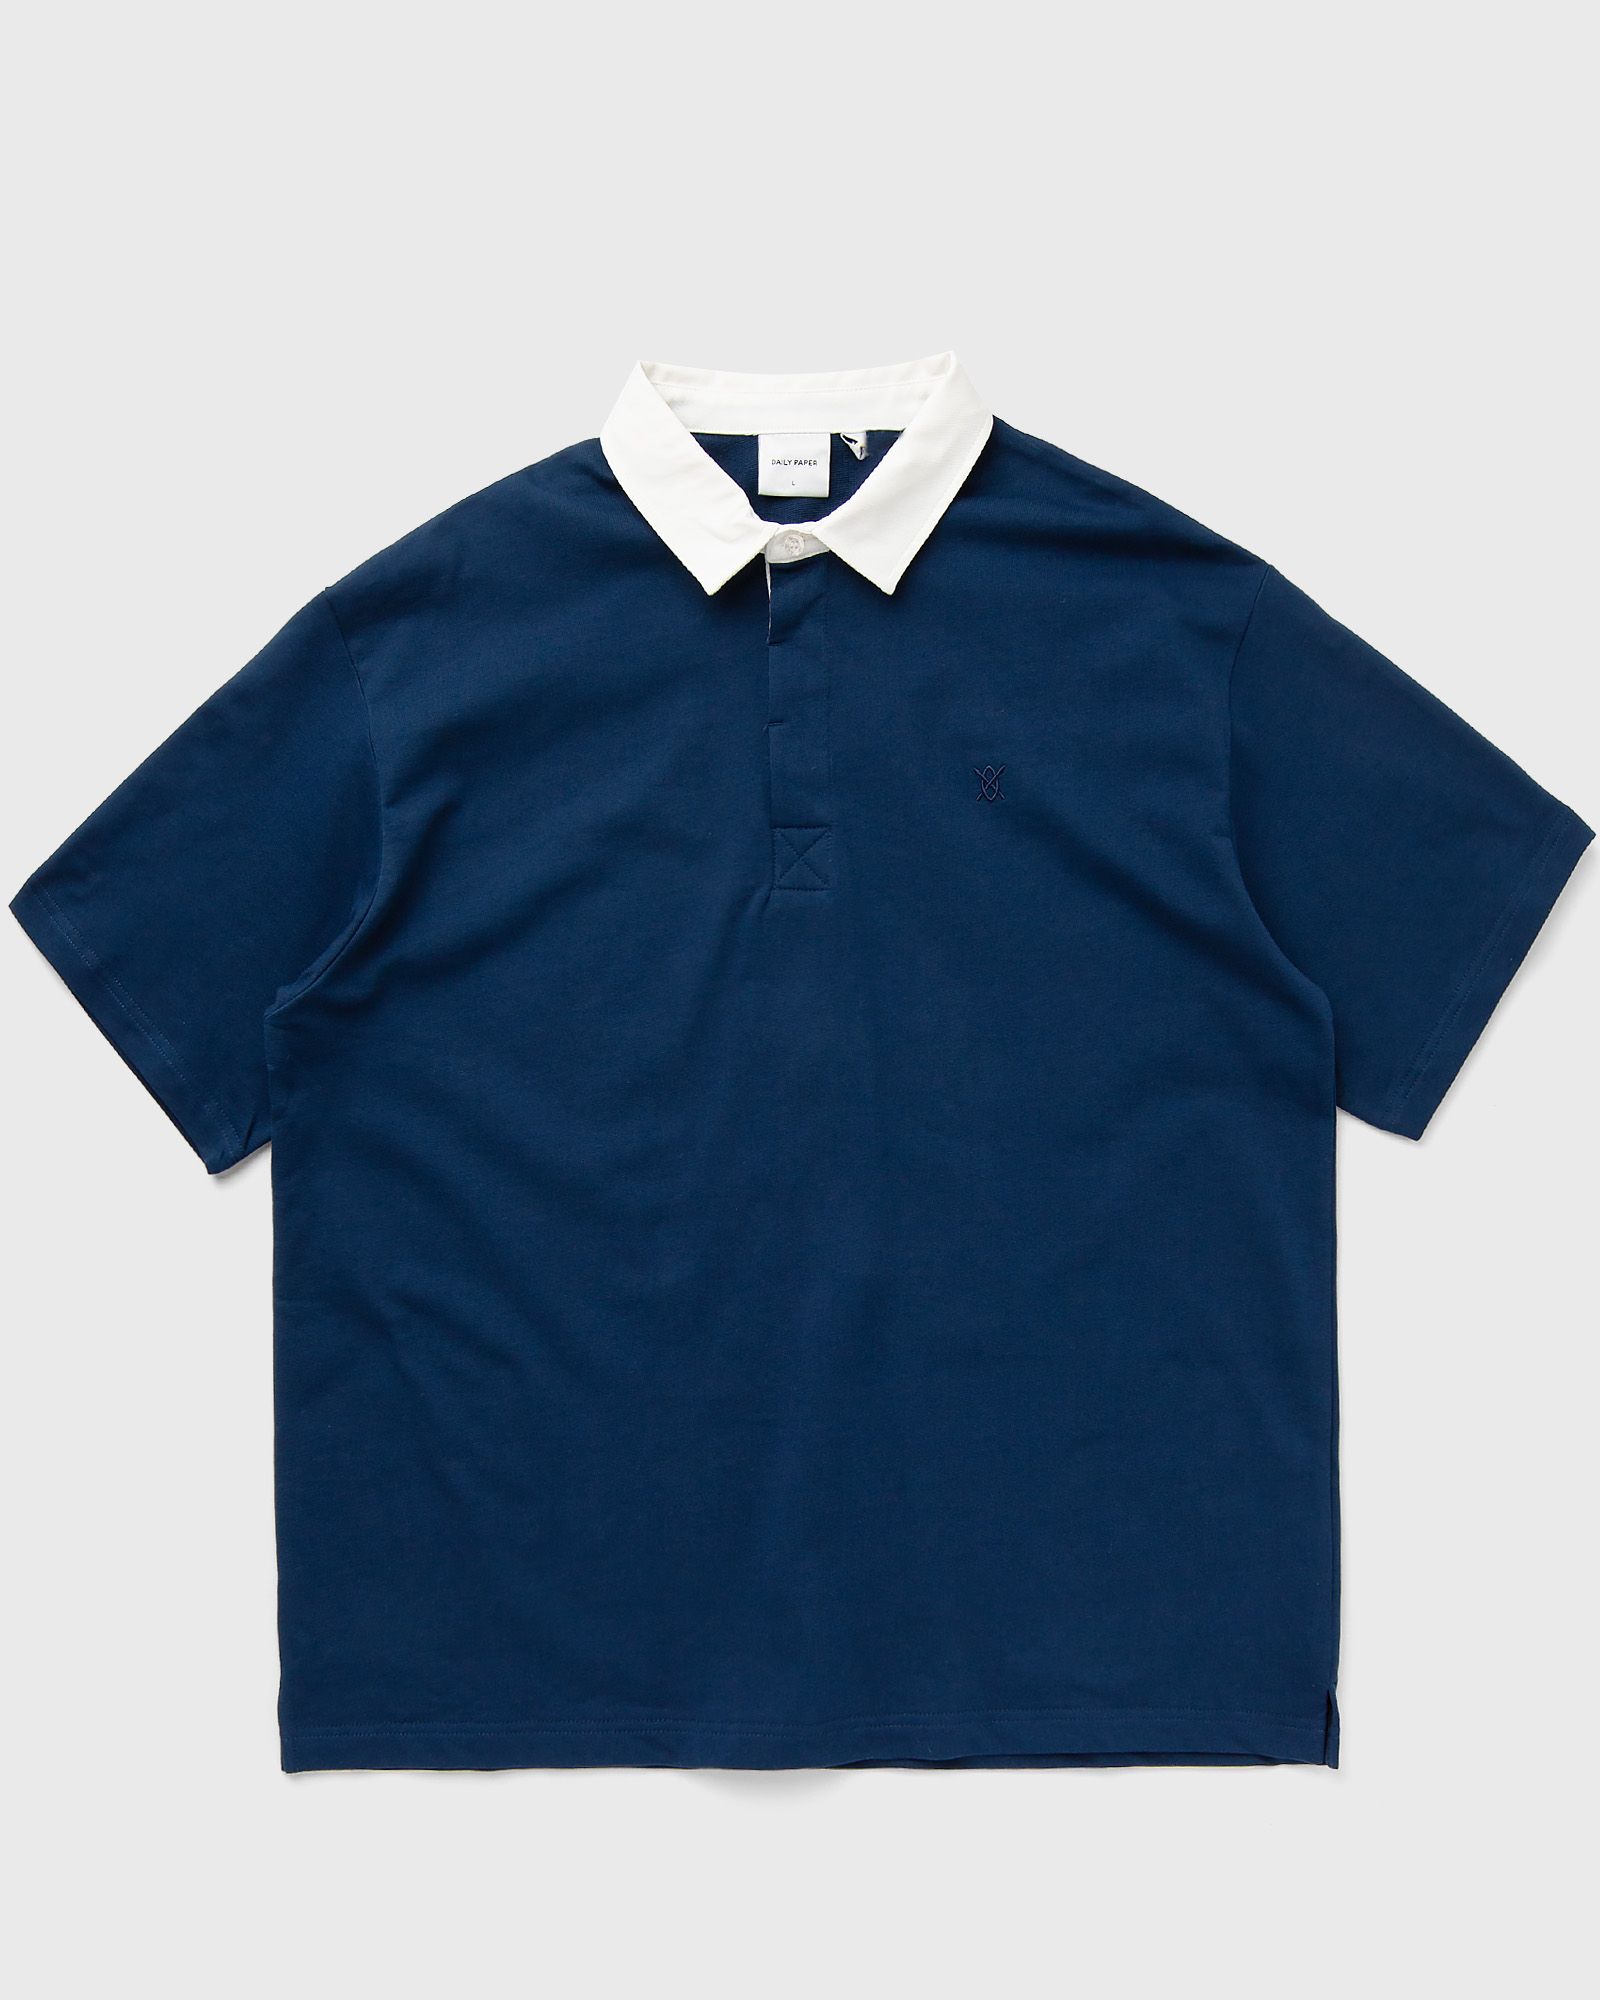 Daily Paper Shield ss polo t-shirt men Polos blue in Größe:S von Daily Paper